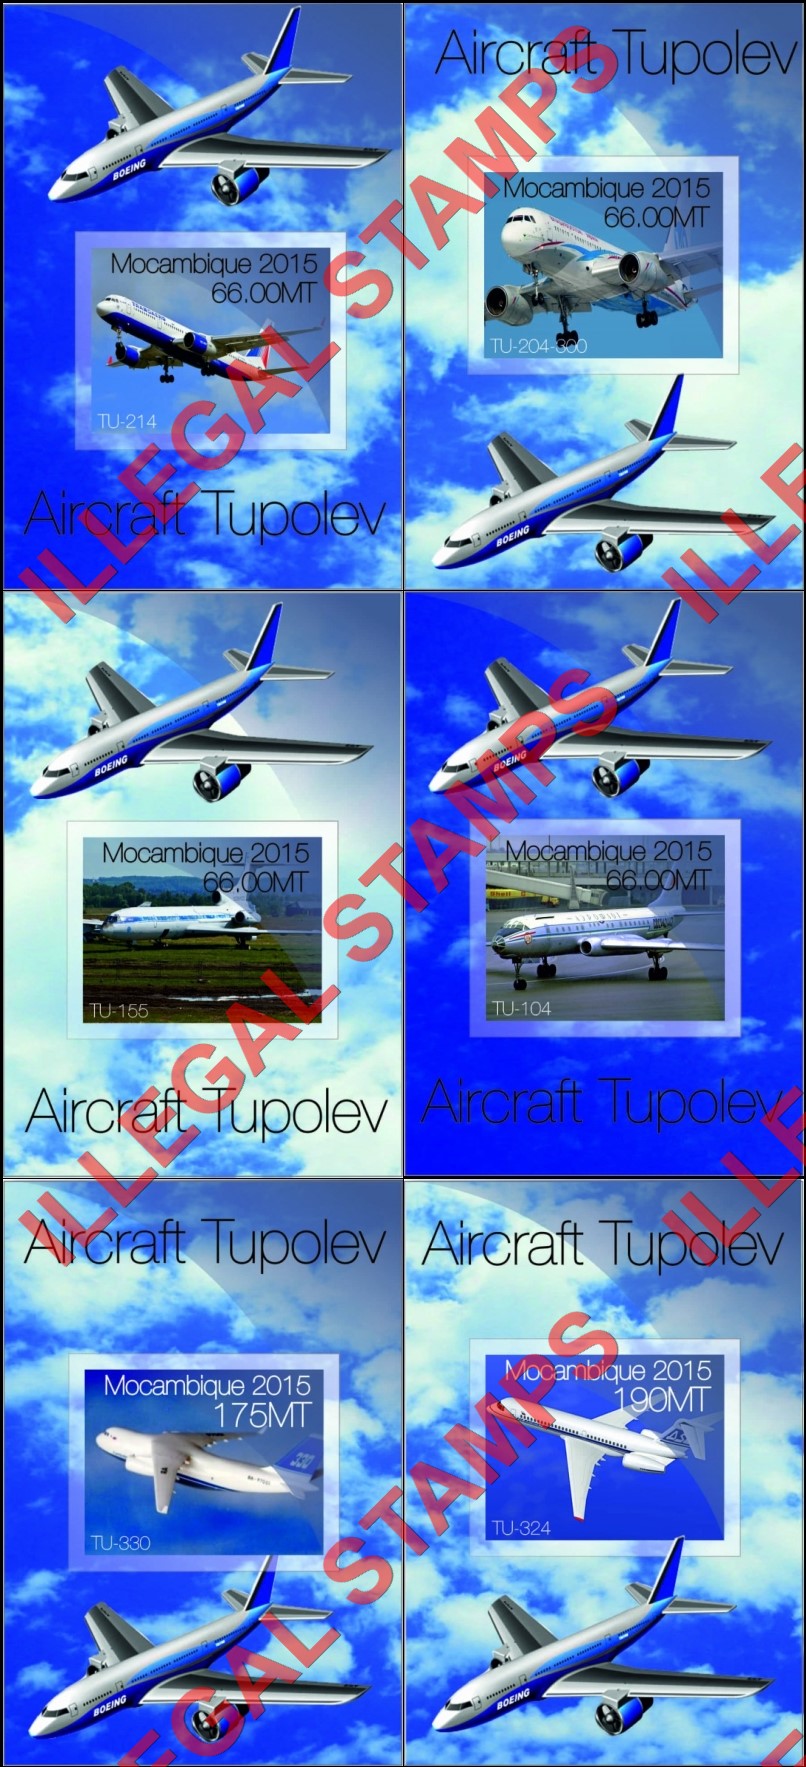  Mozambique 2015 Tupolev Aircraft Counterfeit Illegal Stamp Souvenir Sheets of 1